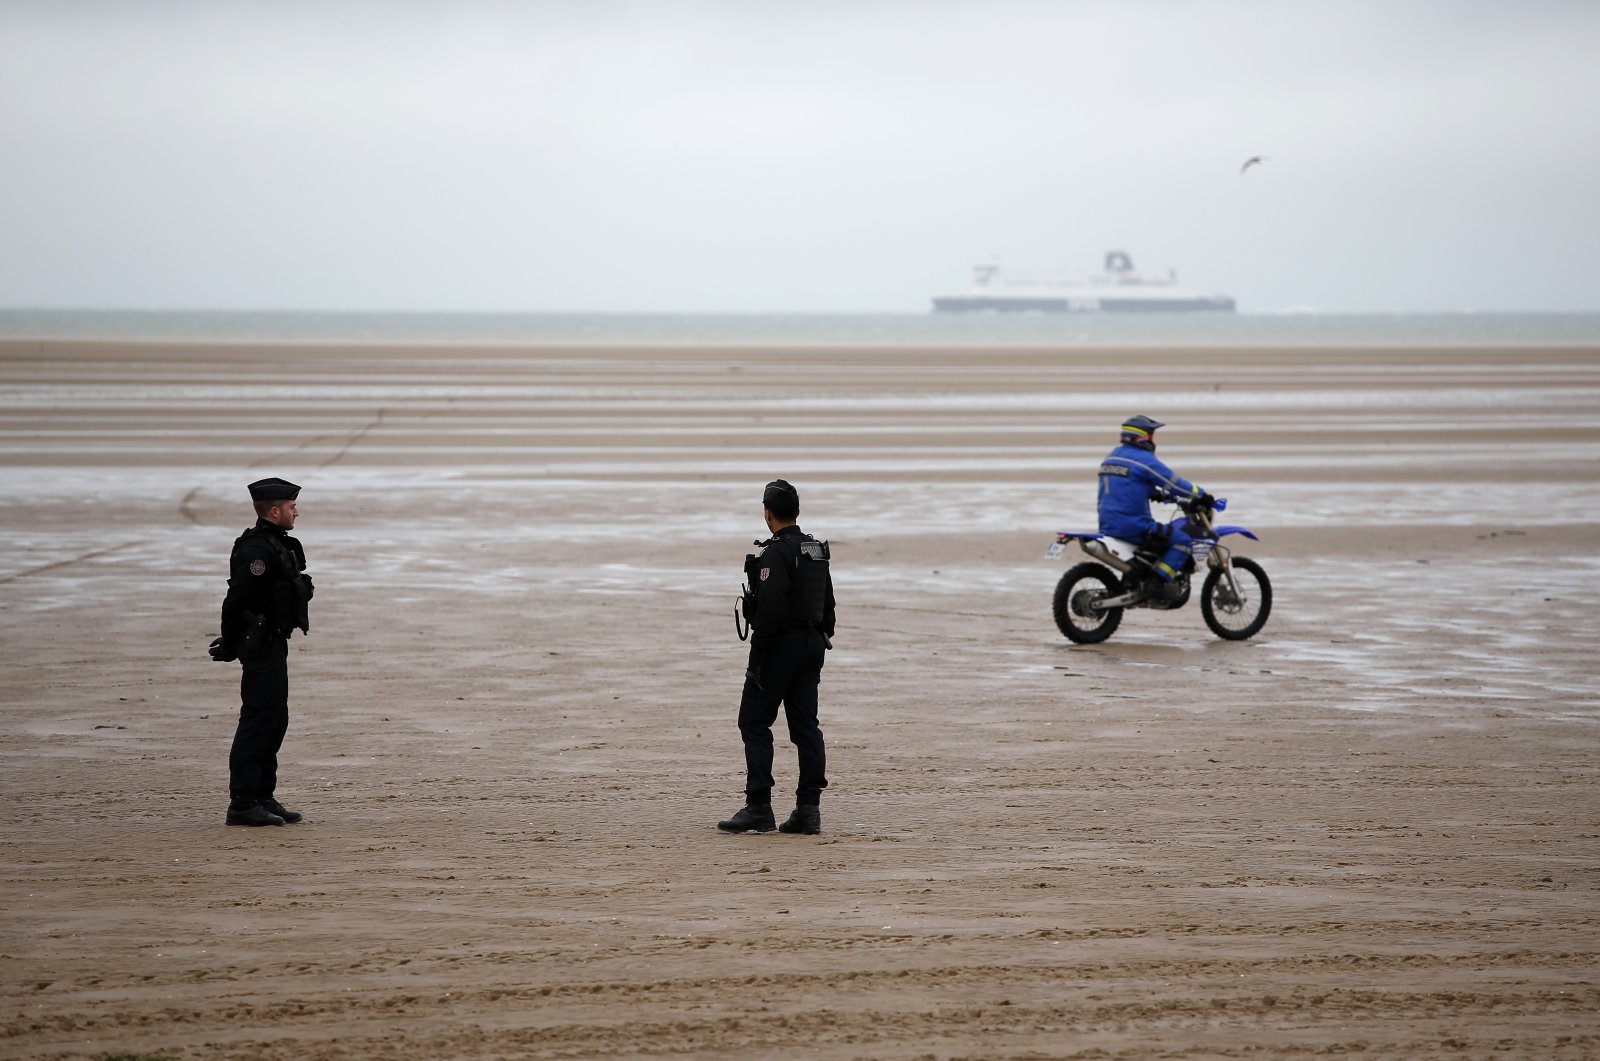 Police officers patrol on the beach of Oye-Plage, northern France, near Calais on Jan. 31, 2020. (AP Photo/Michel Spingler, File)